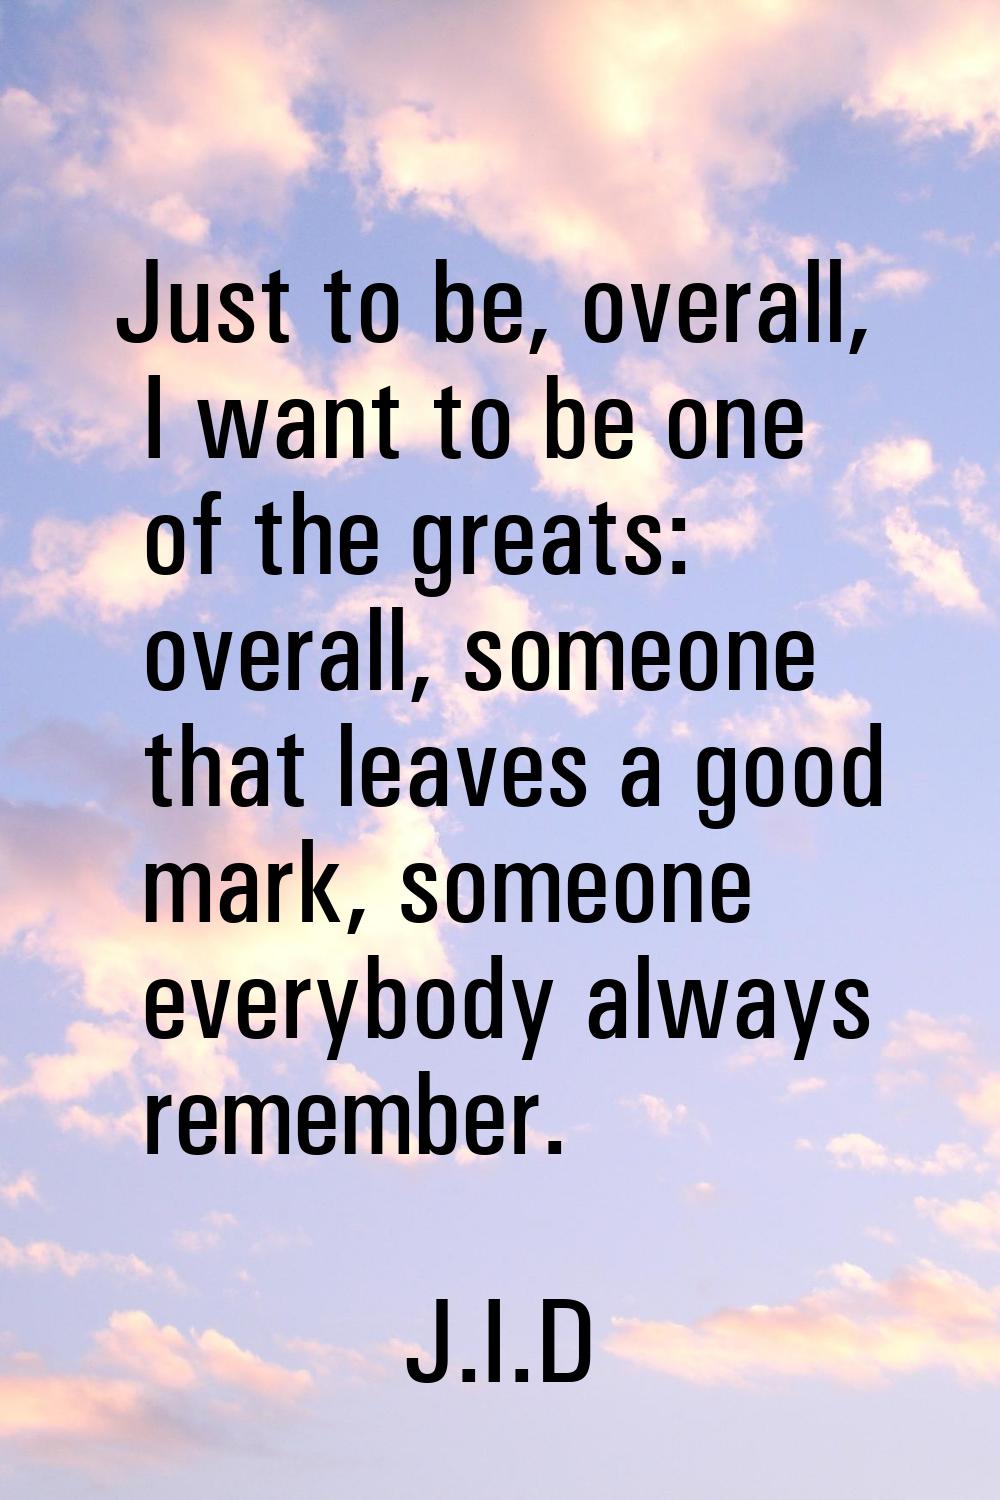 Just to be, overall, I want to be one of the greats: overall, someone that leaves a good mark, some